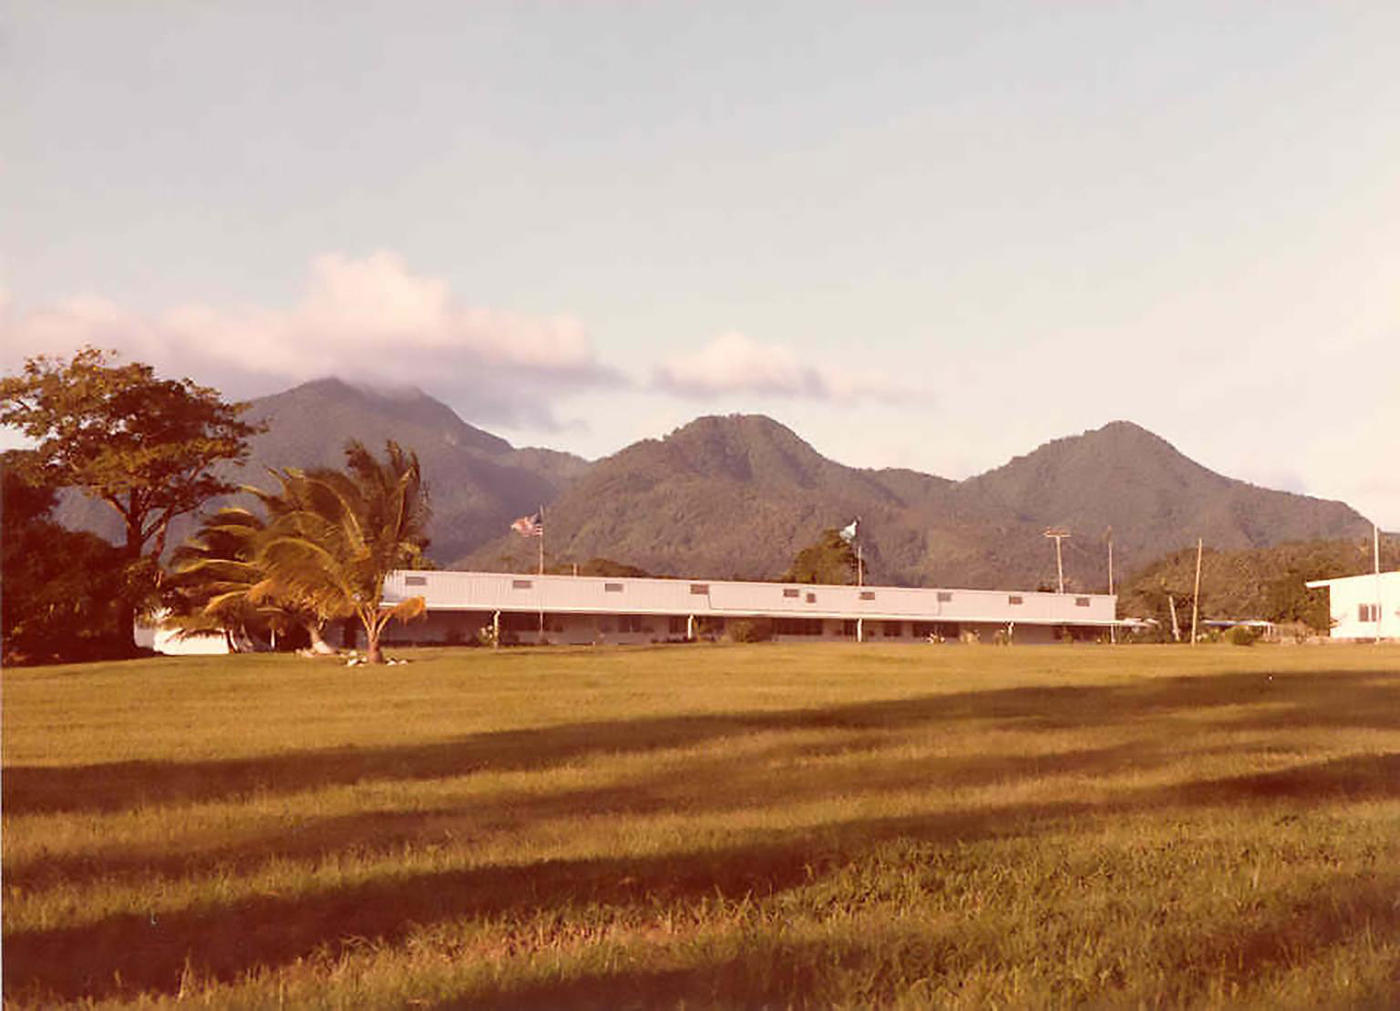 View of palm trees and mountains